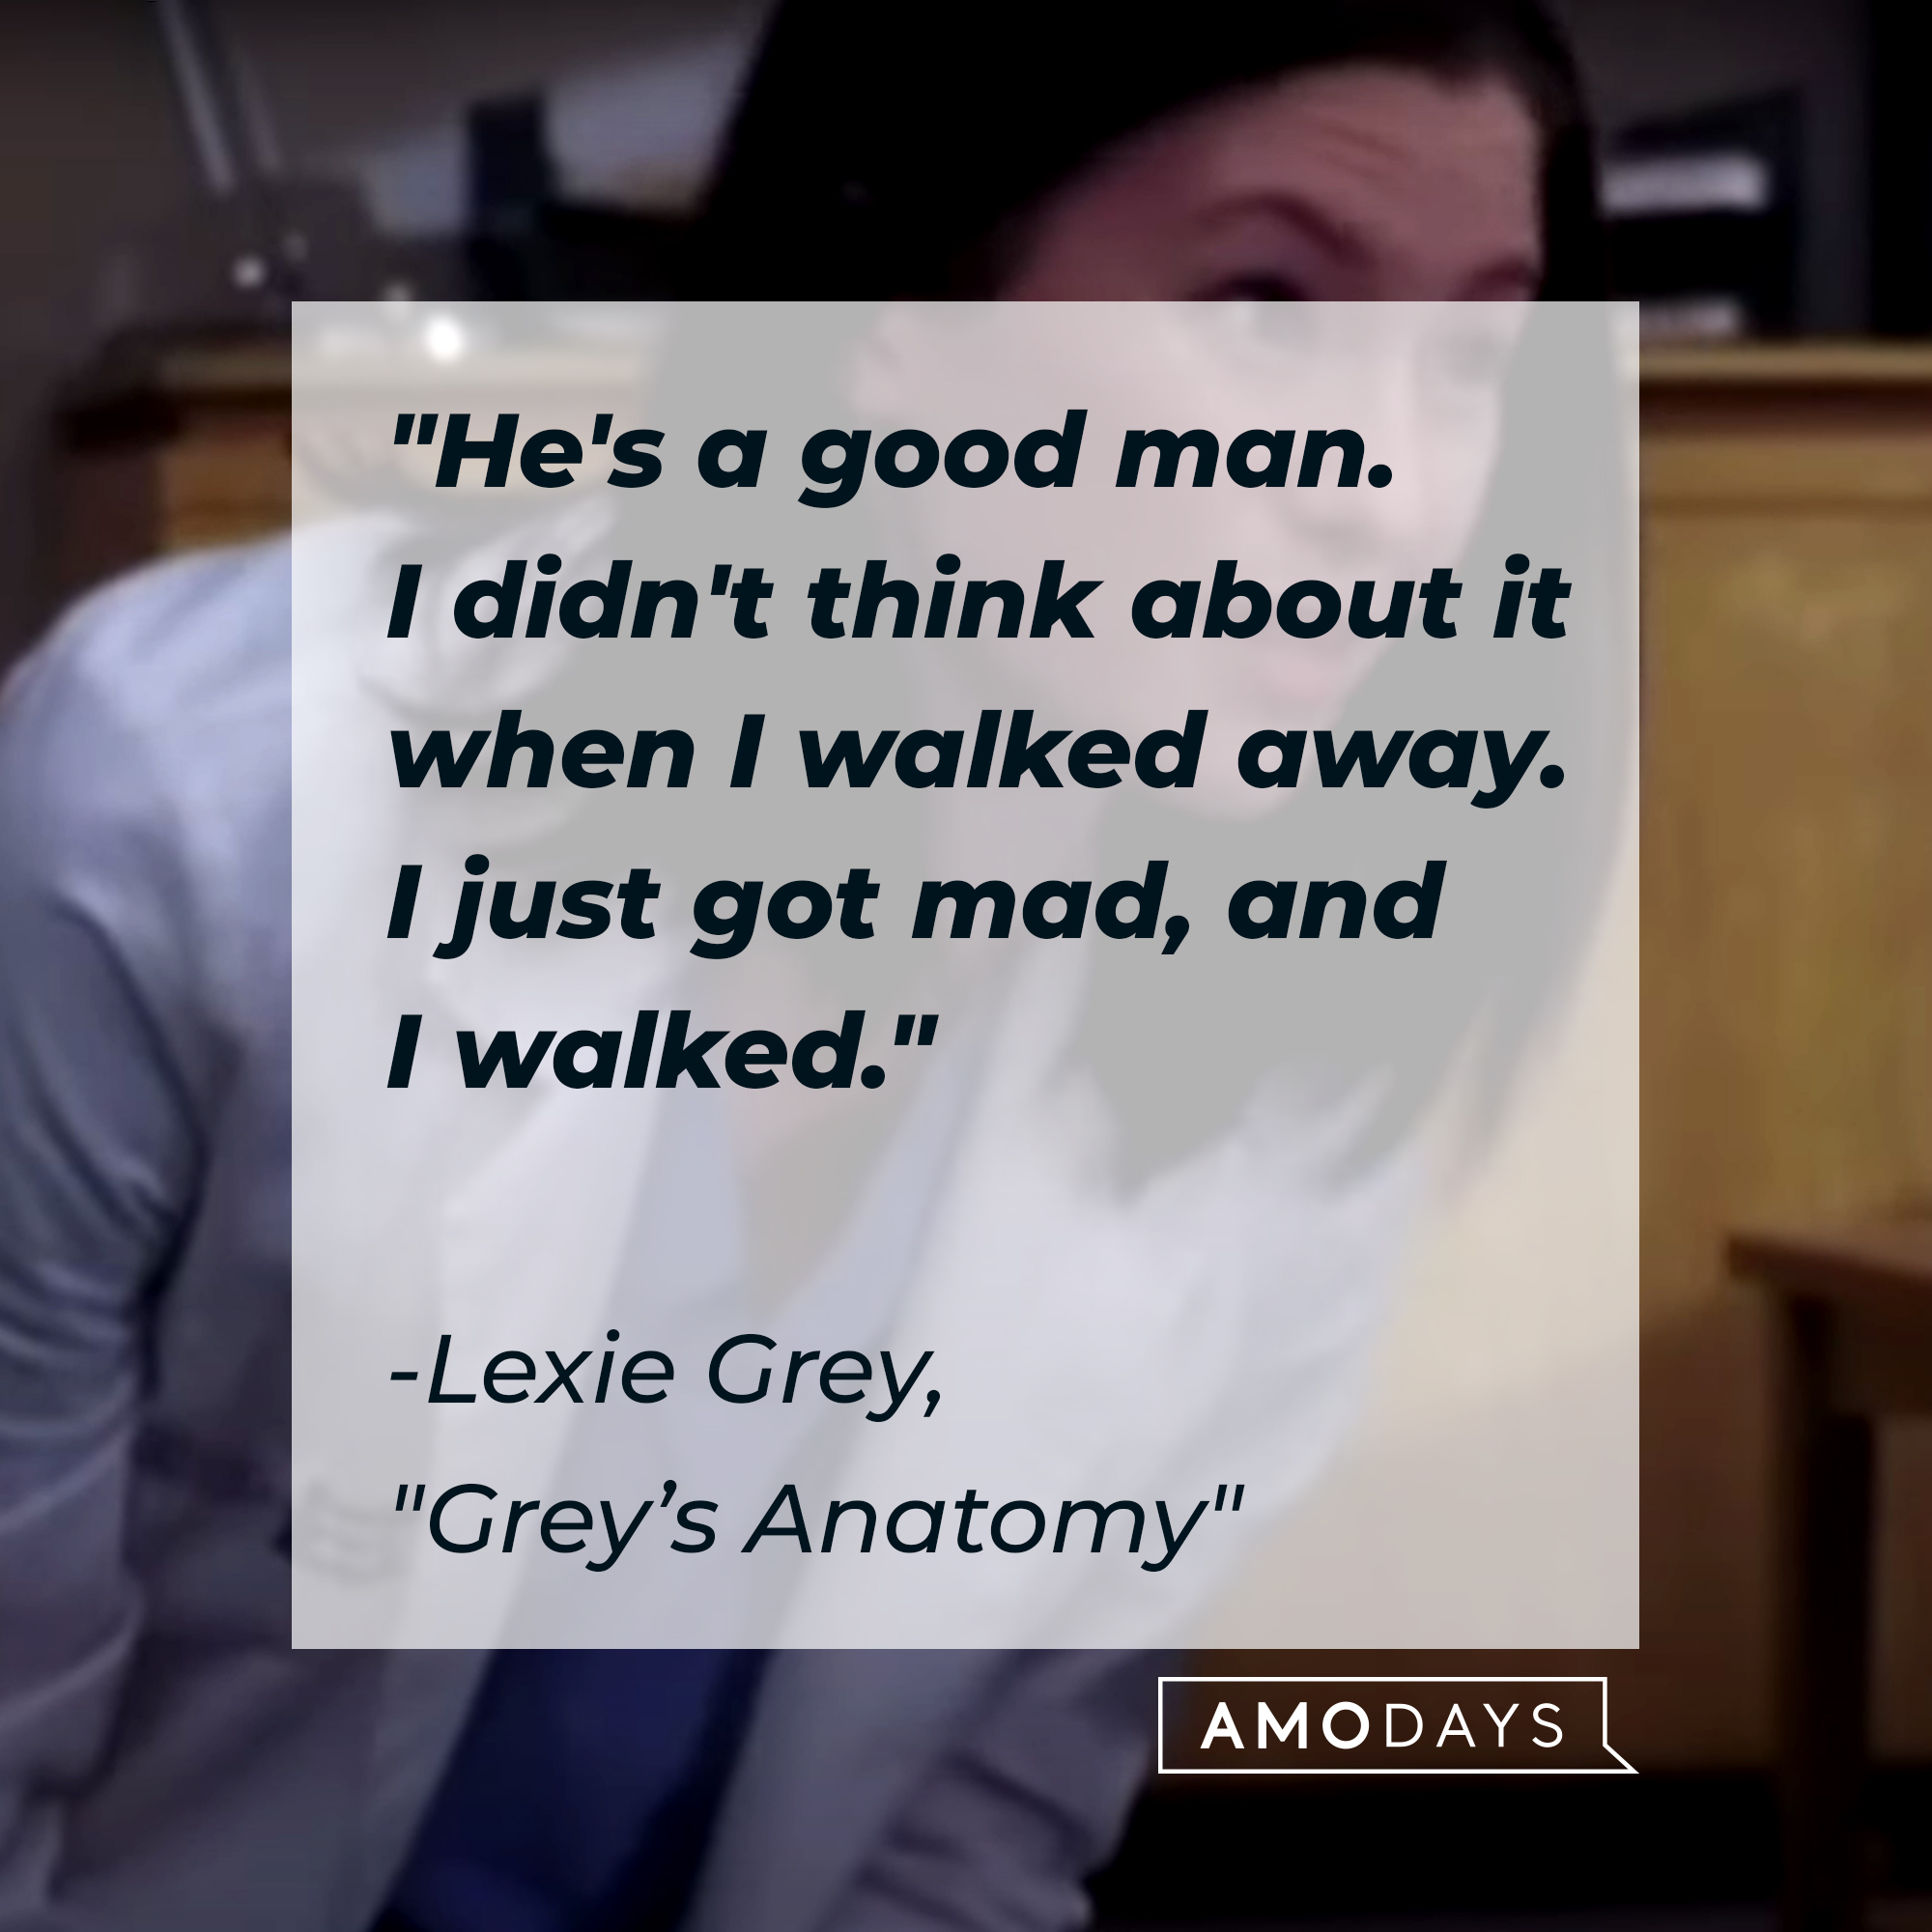 Lexie Grey with her quote: "He's a good man. I didn't think about it when I walked away. I just got mad, and I walked." | Source: Facebook.com/GreysAnatomy